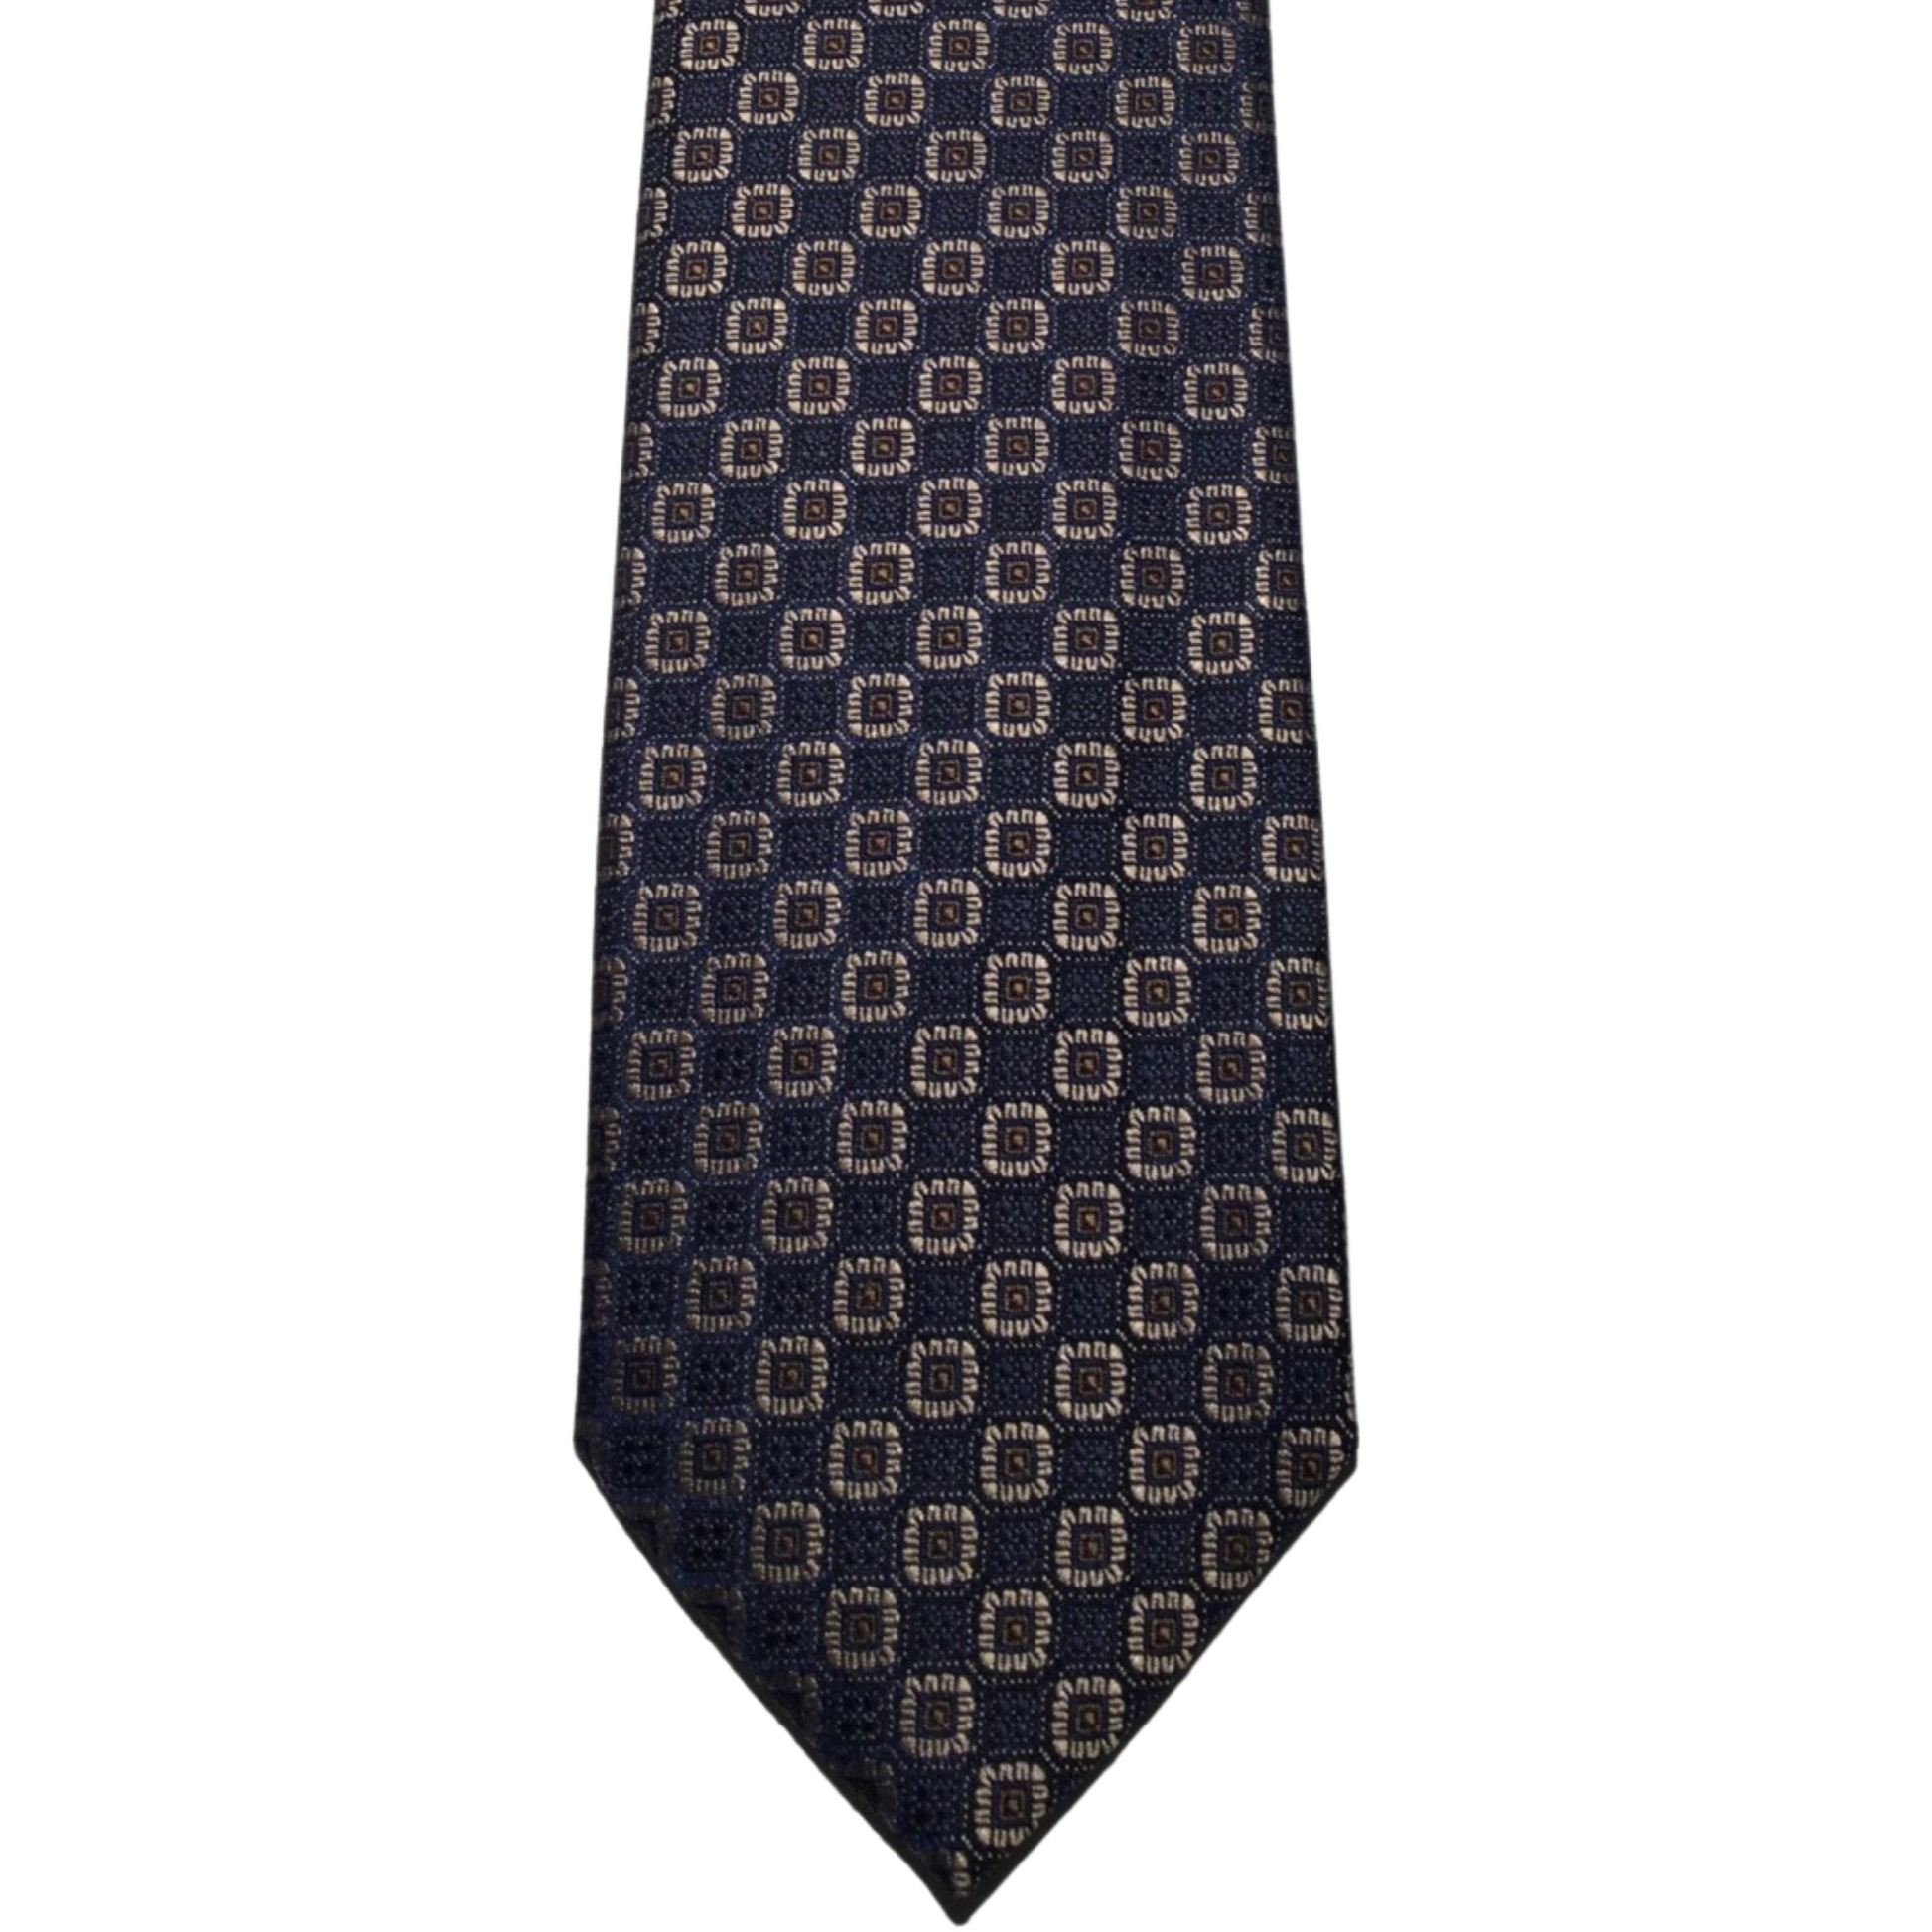 This Gian Marco Venturi microfibre navy blue tie has a beige square pattern, making it a nice pairing with a crisp white or light blue Scoop dress shirt, a navy blue suit and brown dress shoes.